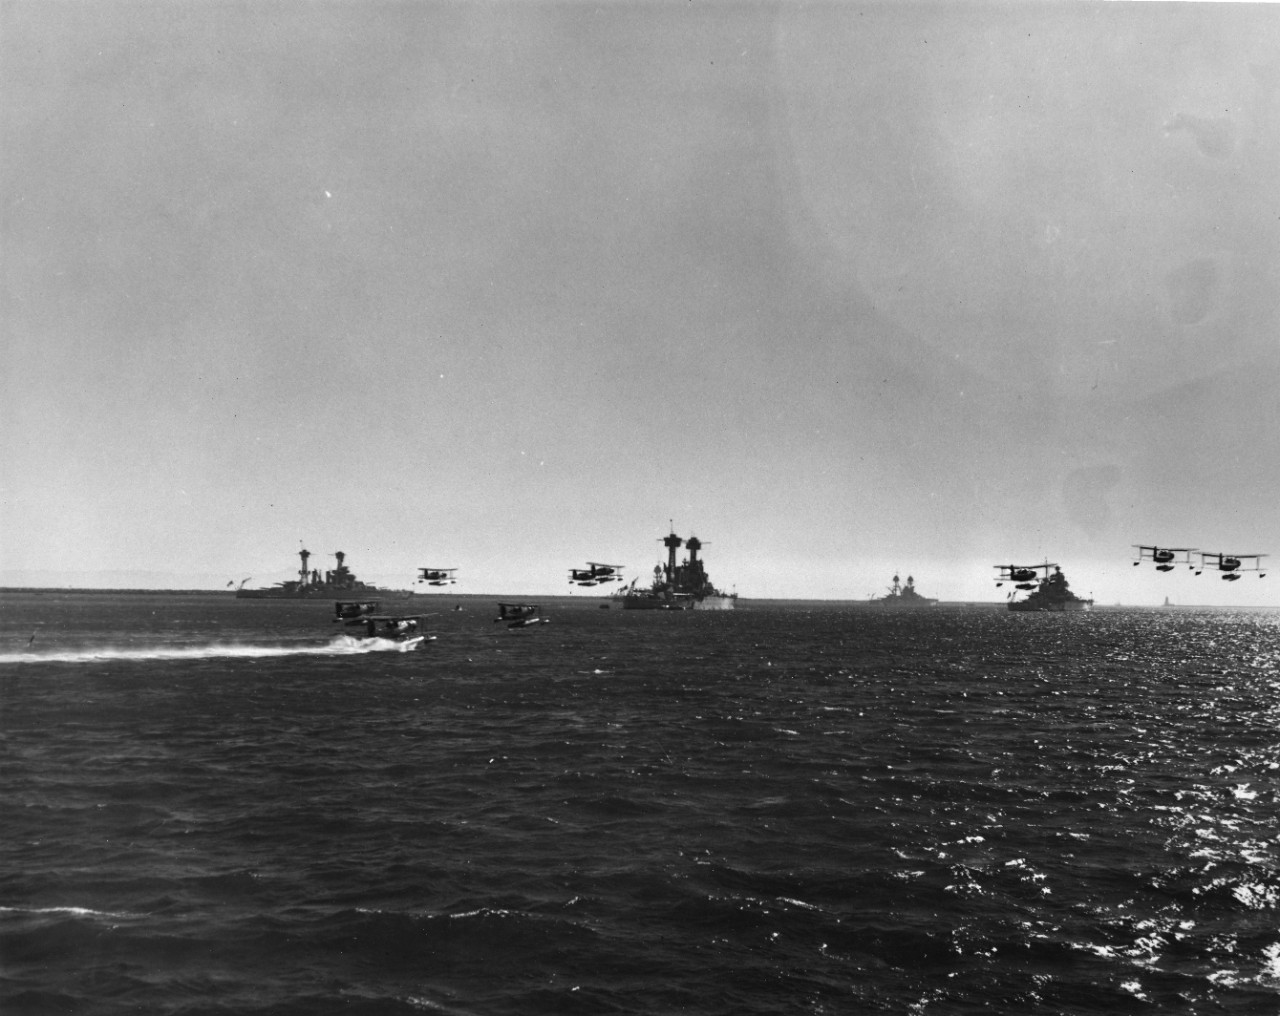 16 black and white images showing U.S. Navy and merchant ships just before World War II.  USS New Mexico (BB-40); USS Erie (PG-50); USS Minneapolis (CA-36); USS Fresno (CL-AA-121); USS Porter (DD-356); USS Idaho (BB-42); USS Augusta (CA-31); USS Honolulu (CL-48); USS Dale (DD-353); USS Pike (SS-173); USS Babbitt (DD-128); USS S-1 (SS-105); Fleet Review honoring American Legion circa 1939, with battleships and Douglass TBD-1 Devastators and Curtiss SOC Seagulls; launchings of SS Marina and SS Manhattan, with tug N.C. Jefferson.  1 image removed to the NH collection.